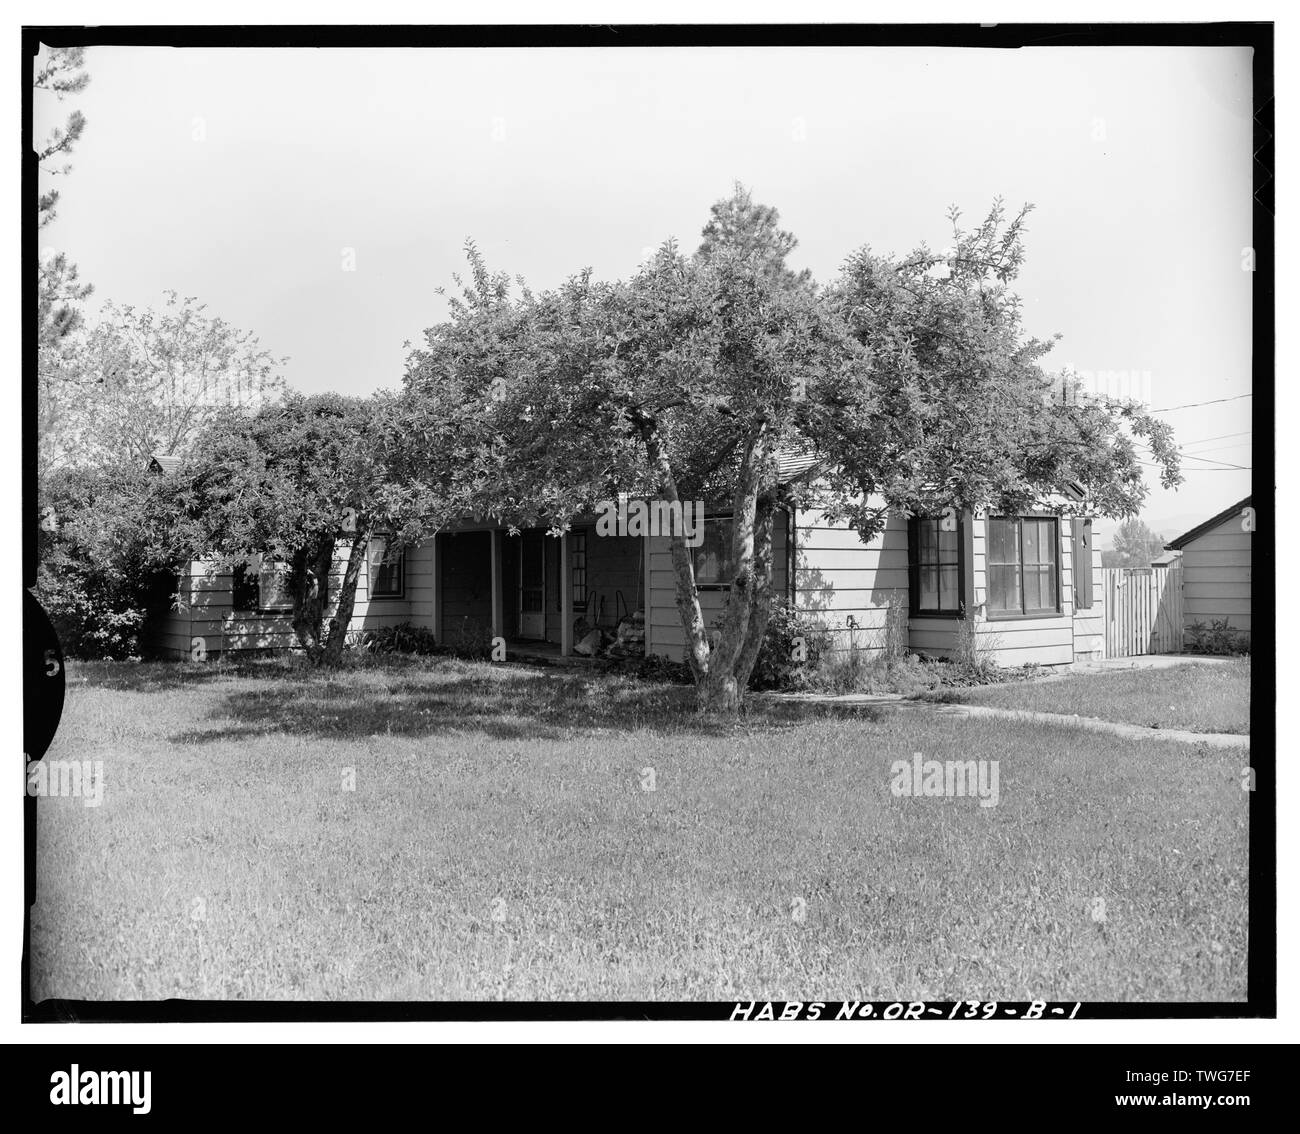 RANGERS RESIDENCE, SOUTHWEST FRONT AND SOUTHEAST SIDE, LOOKING NORTH - Union Ranger Distric Compound, Rangers Residence, Fronting State Highway 203, at West edge of Union, Union, Union County, OR Stock Photo